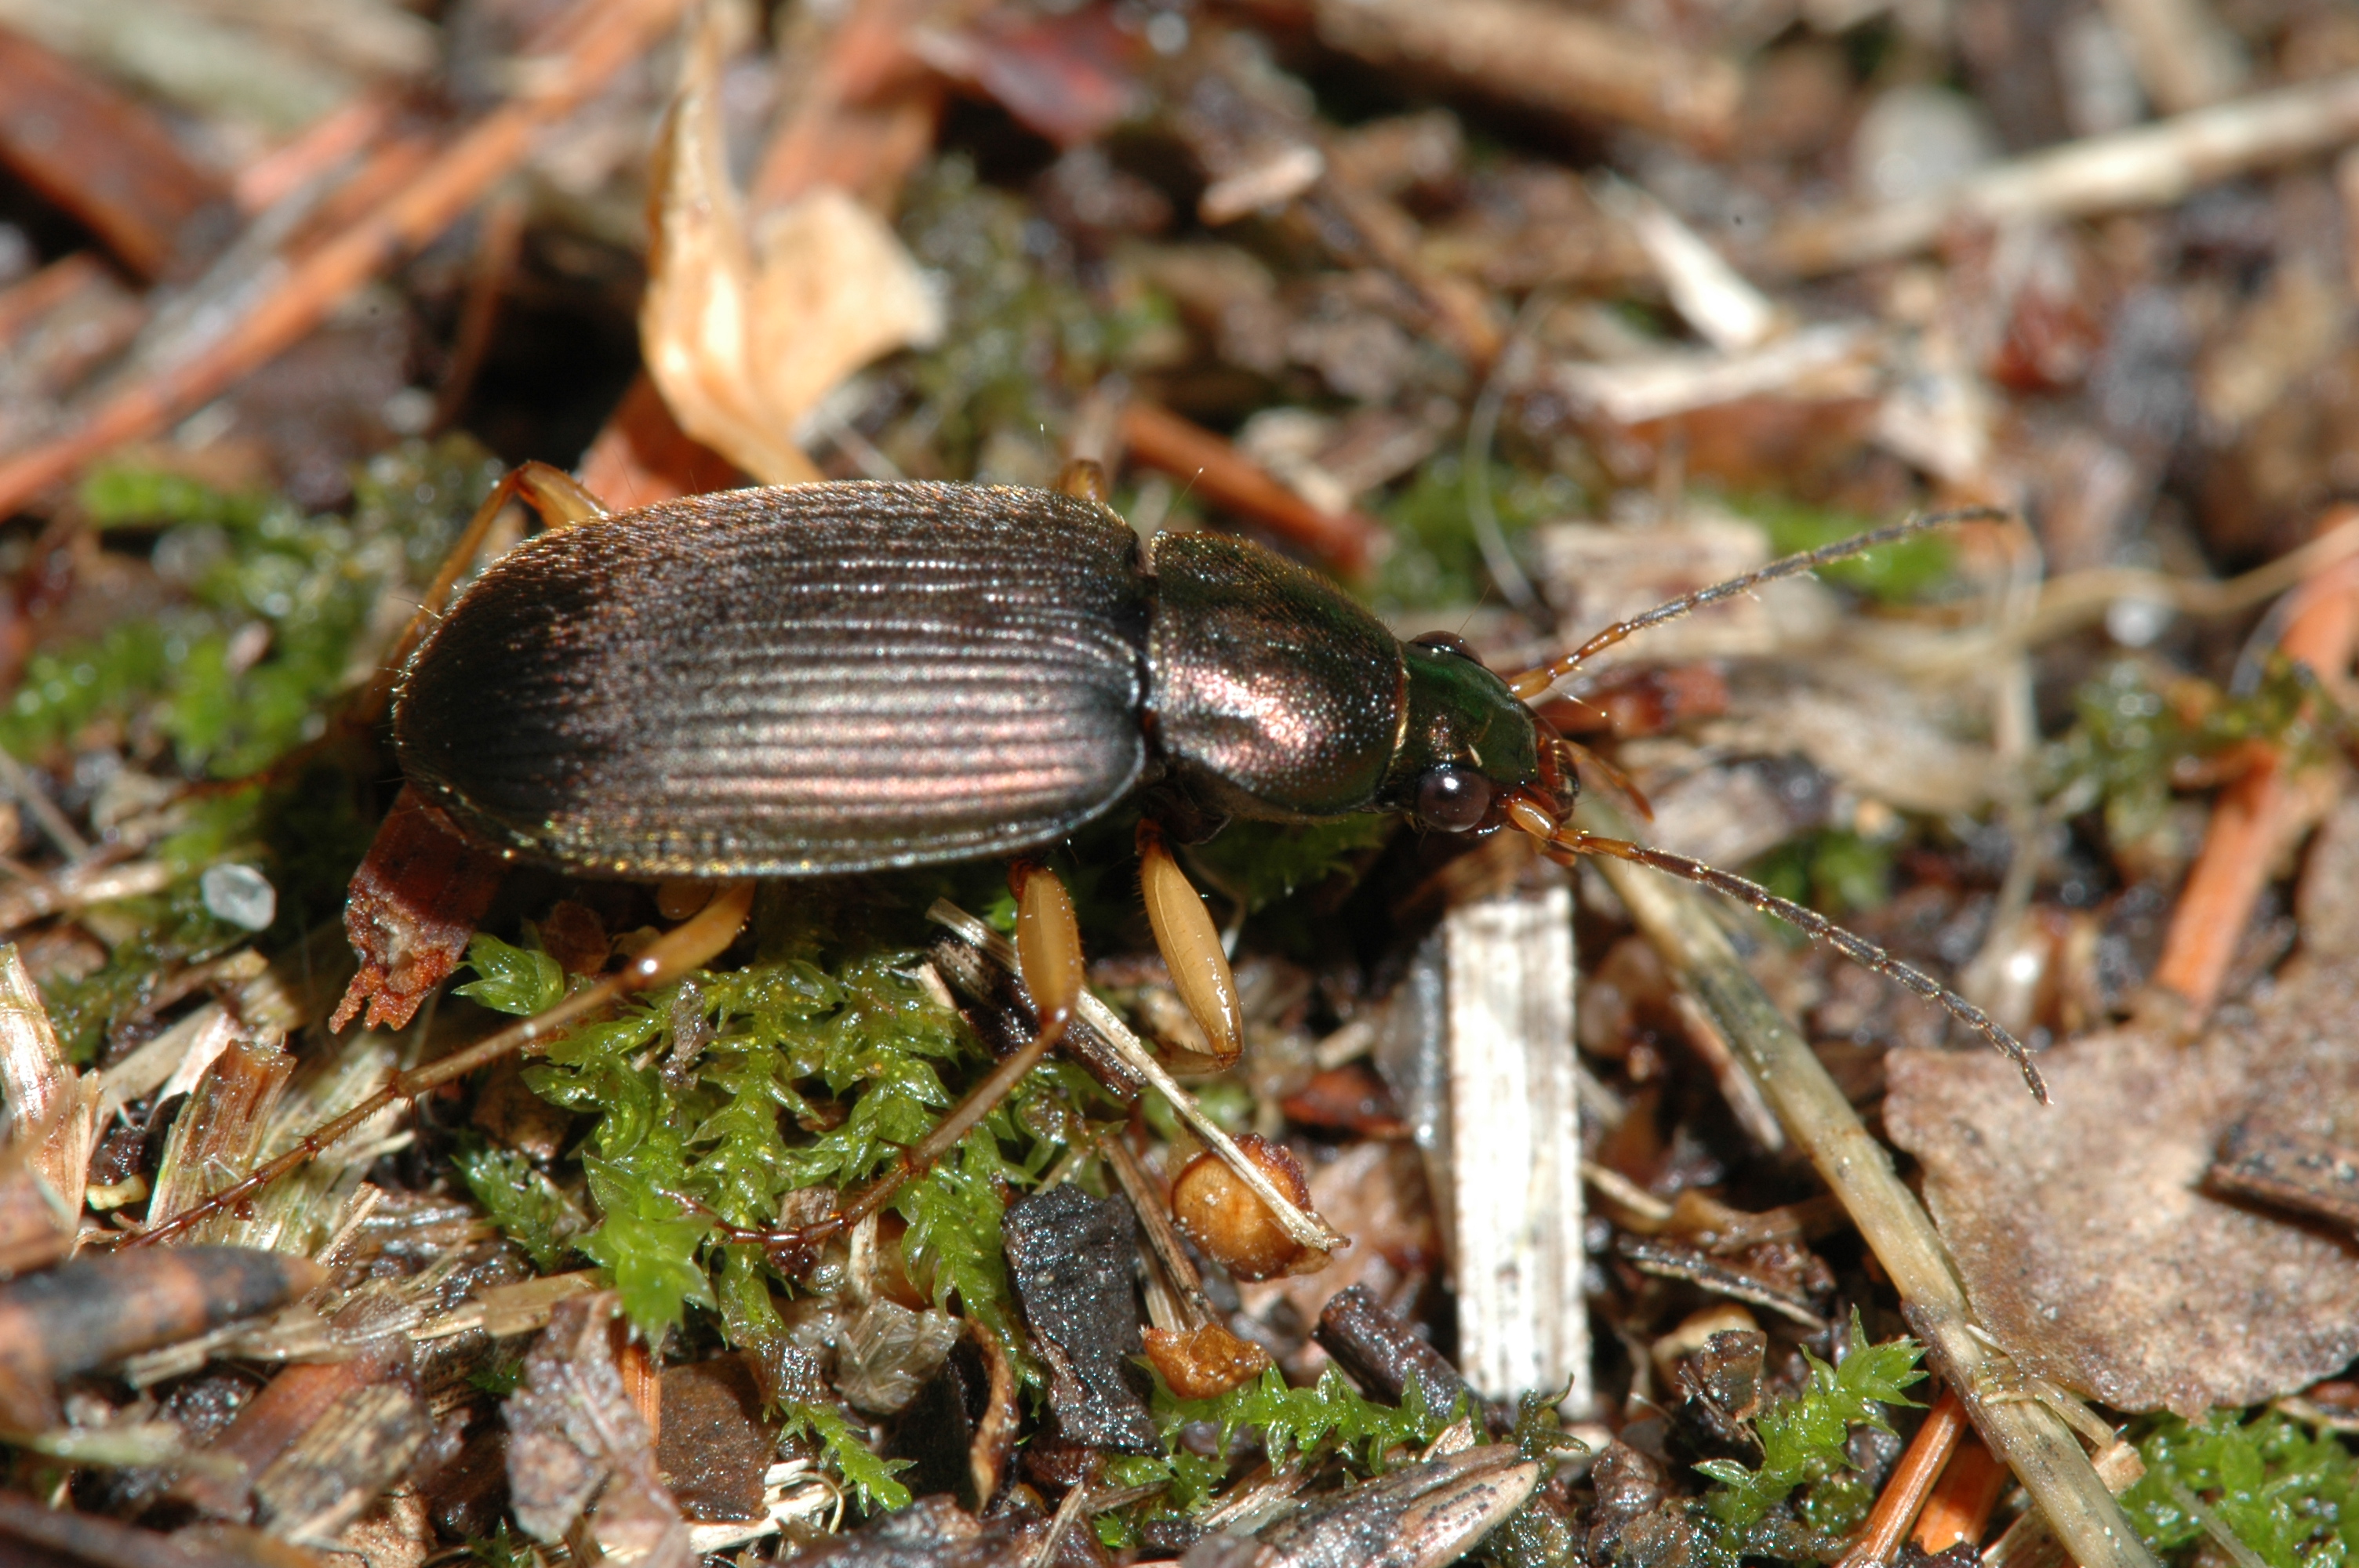 How to Get Rid of Ground Beetles - Insectek Pest Solutions